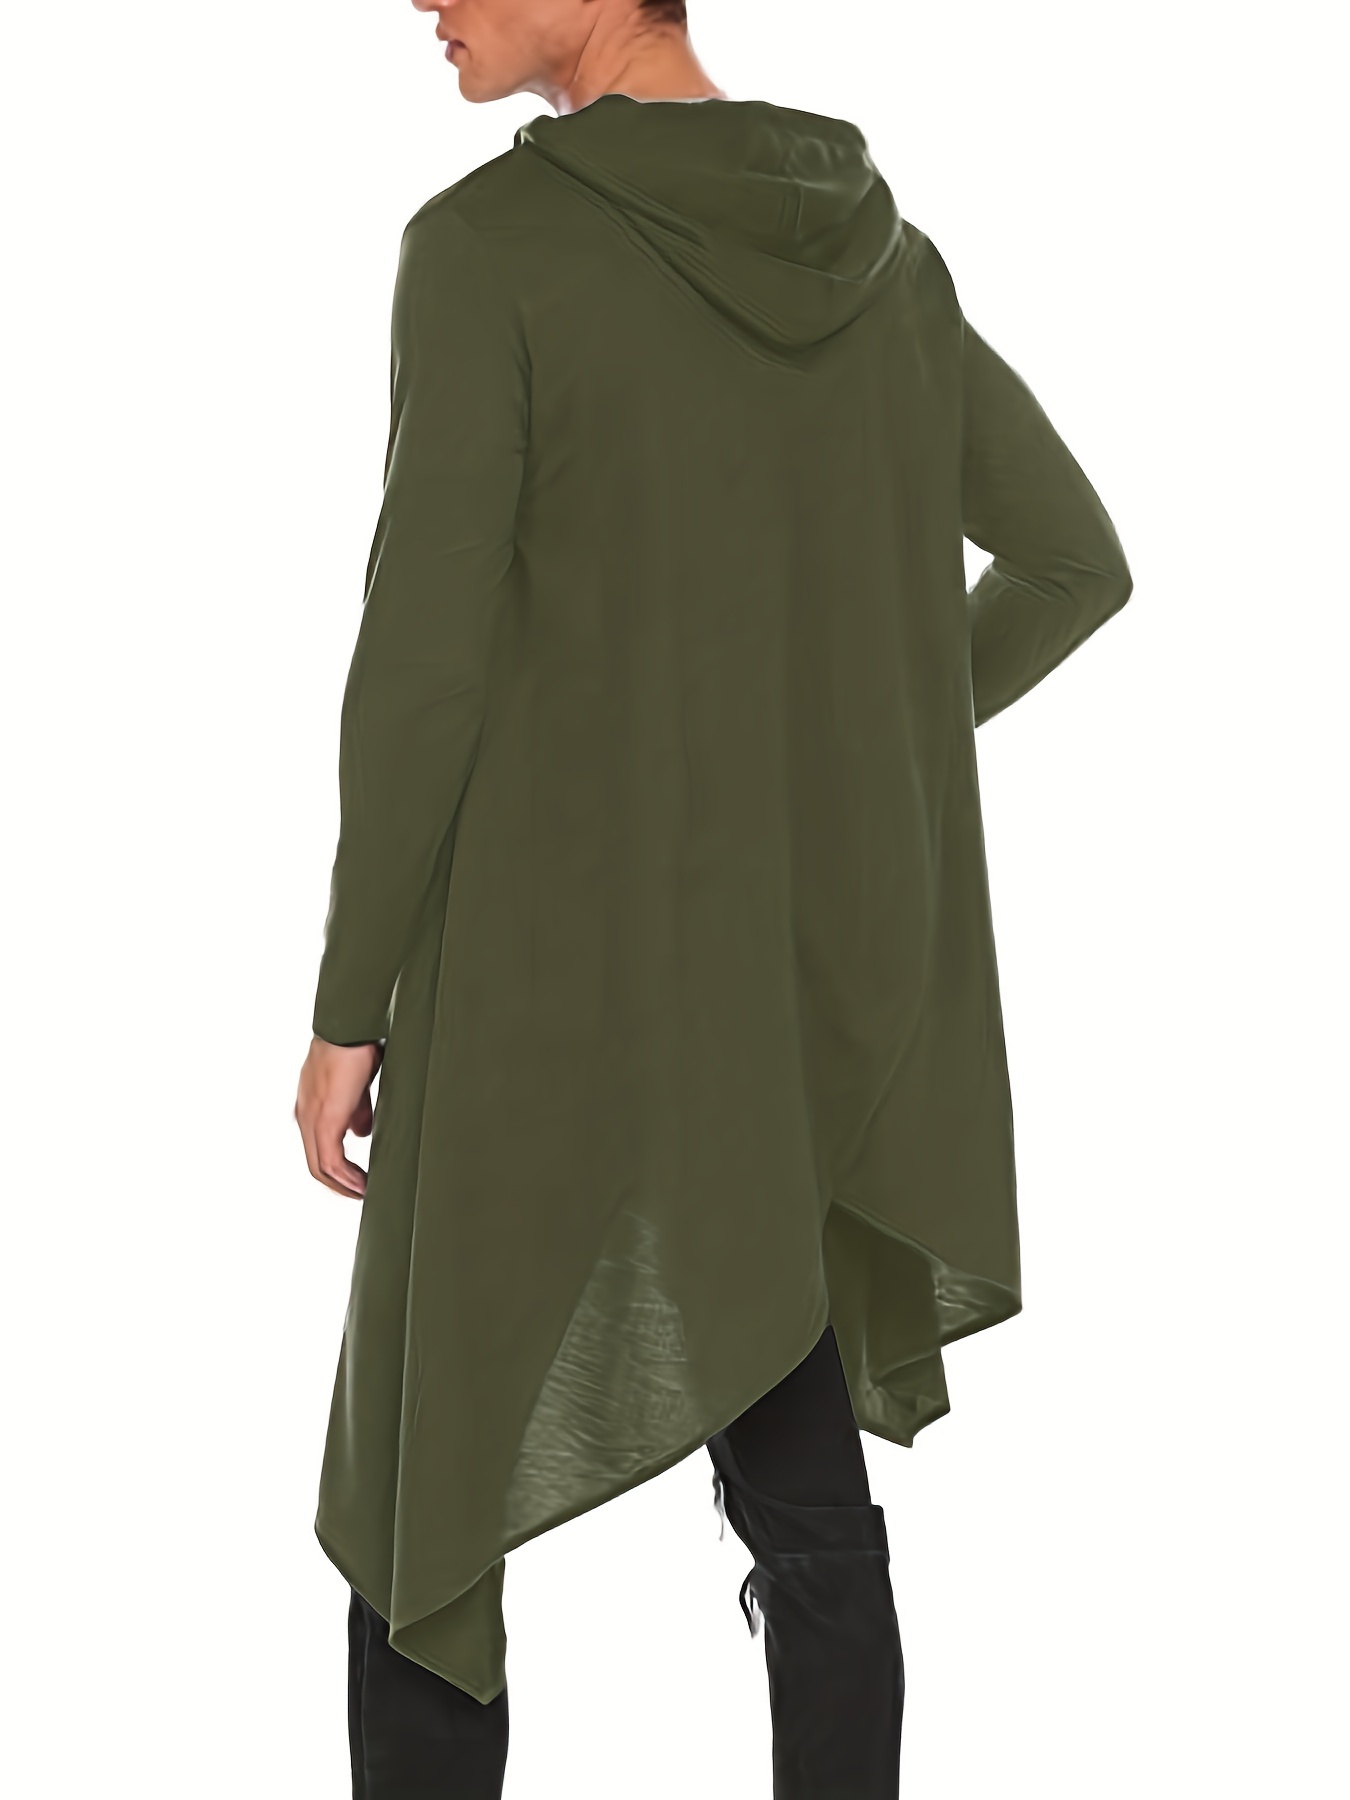 Men's Hooded Cloaks with POCKETS in Black, Green, Red or Brown